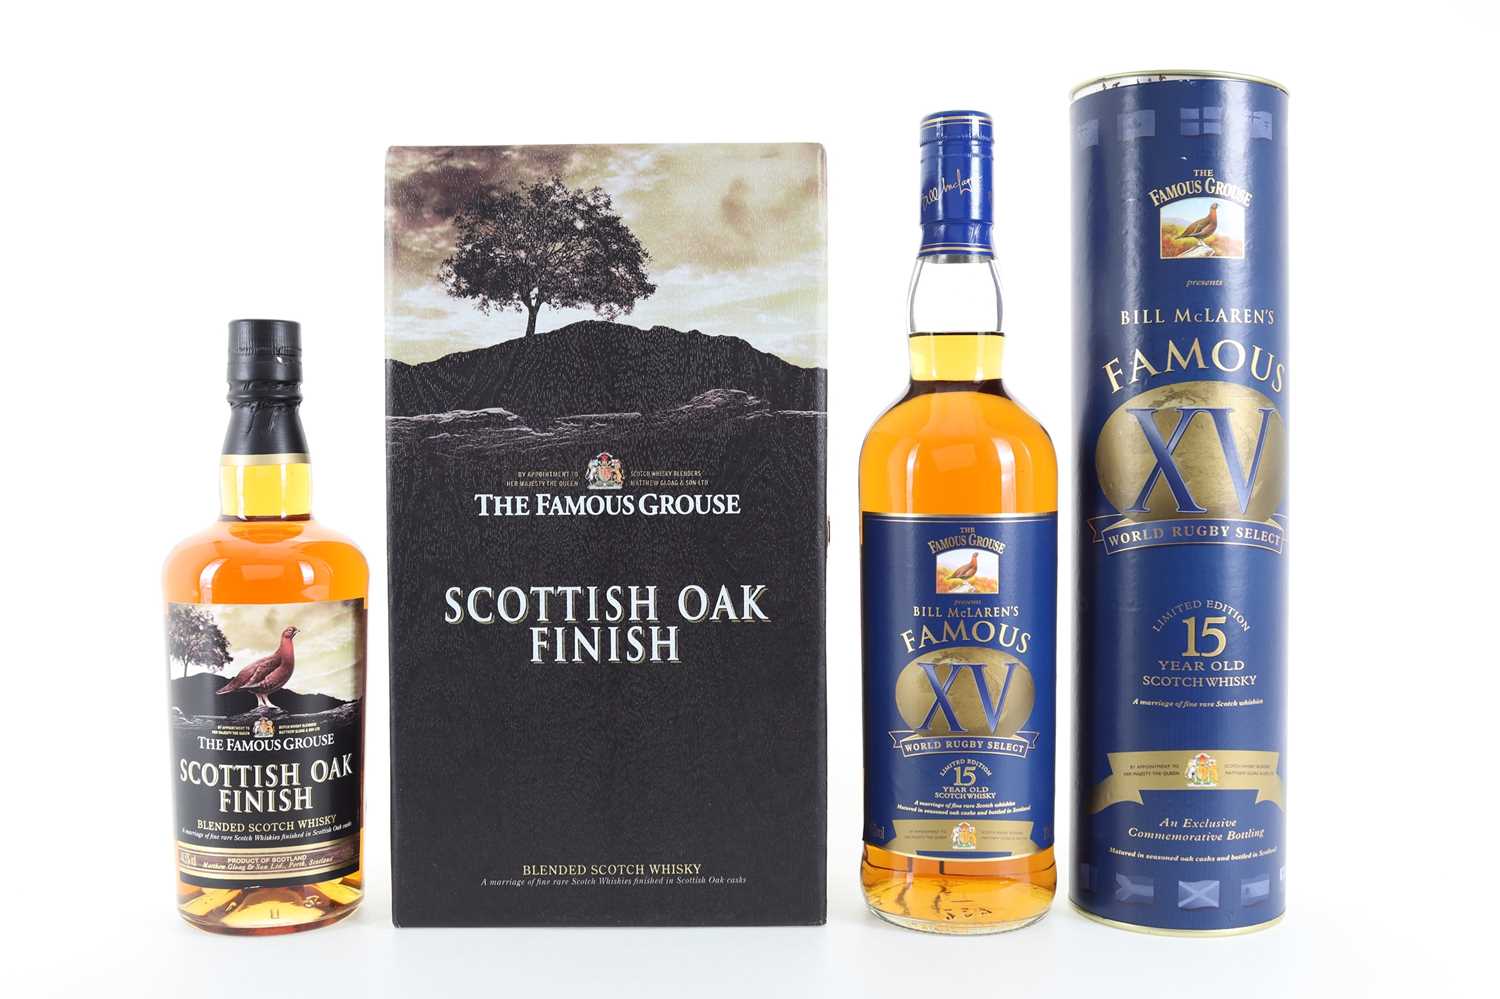 FAMOUS GROUSE SCOTTISH OAK FINISH 50CL AND 15 YEAR OLD BILL MCLAREN BLENDED WHISKY